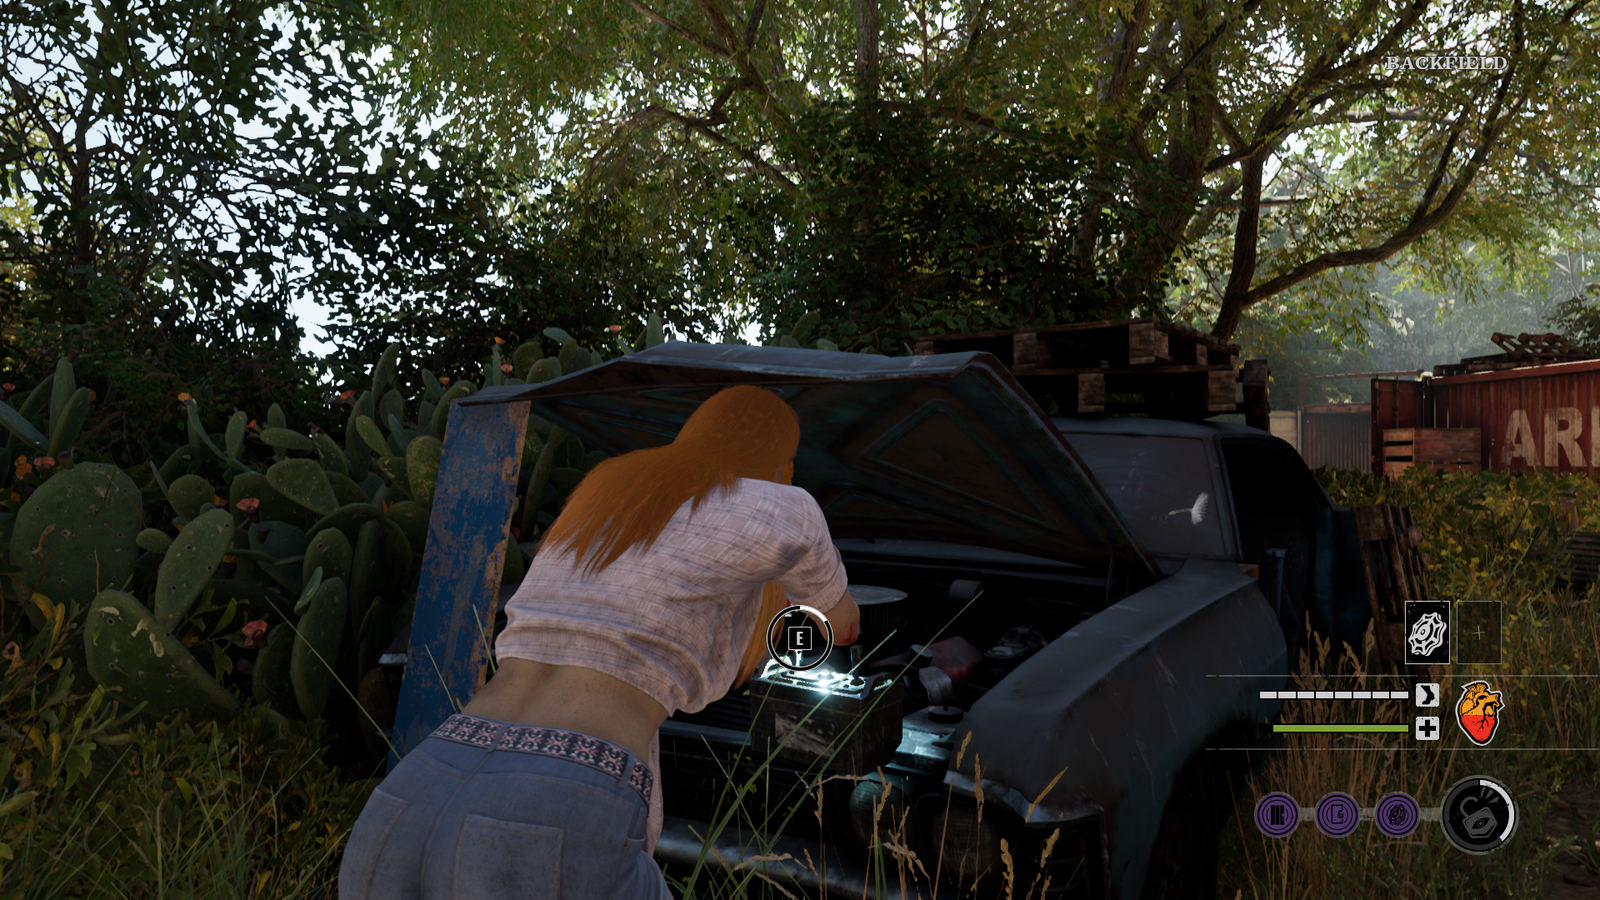 Connie breaking car battery in texas chain saw massacre